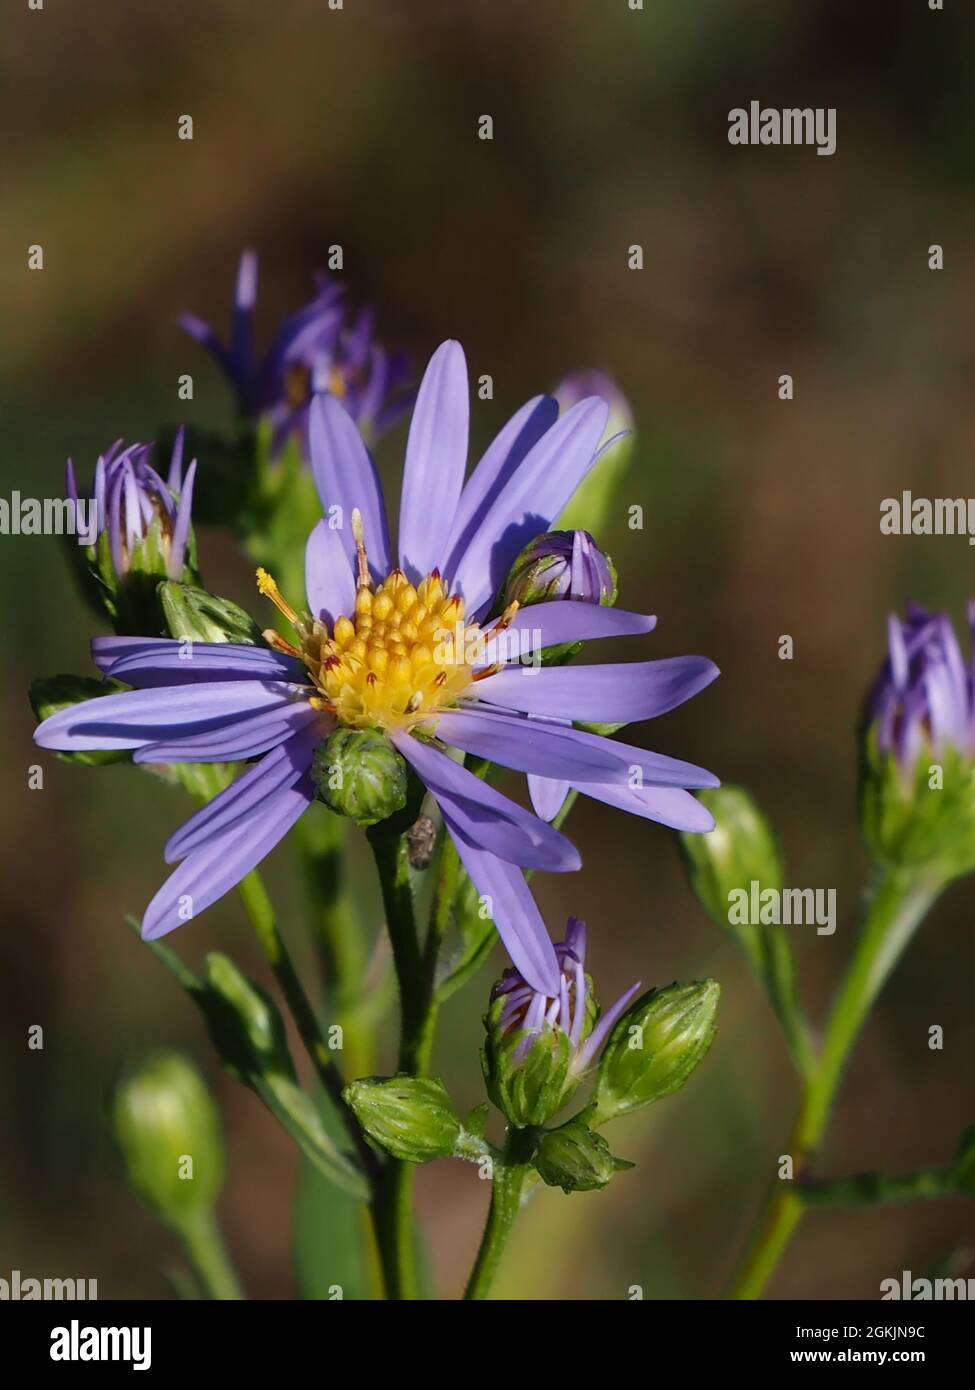 OLYMPUS DIGITAL CAMERA - Close-up of the purple flower on a smooth aster plant growing in a meadow with a blurred background. Stock Photo